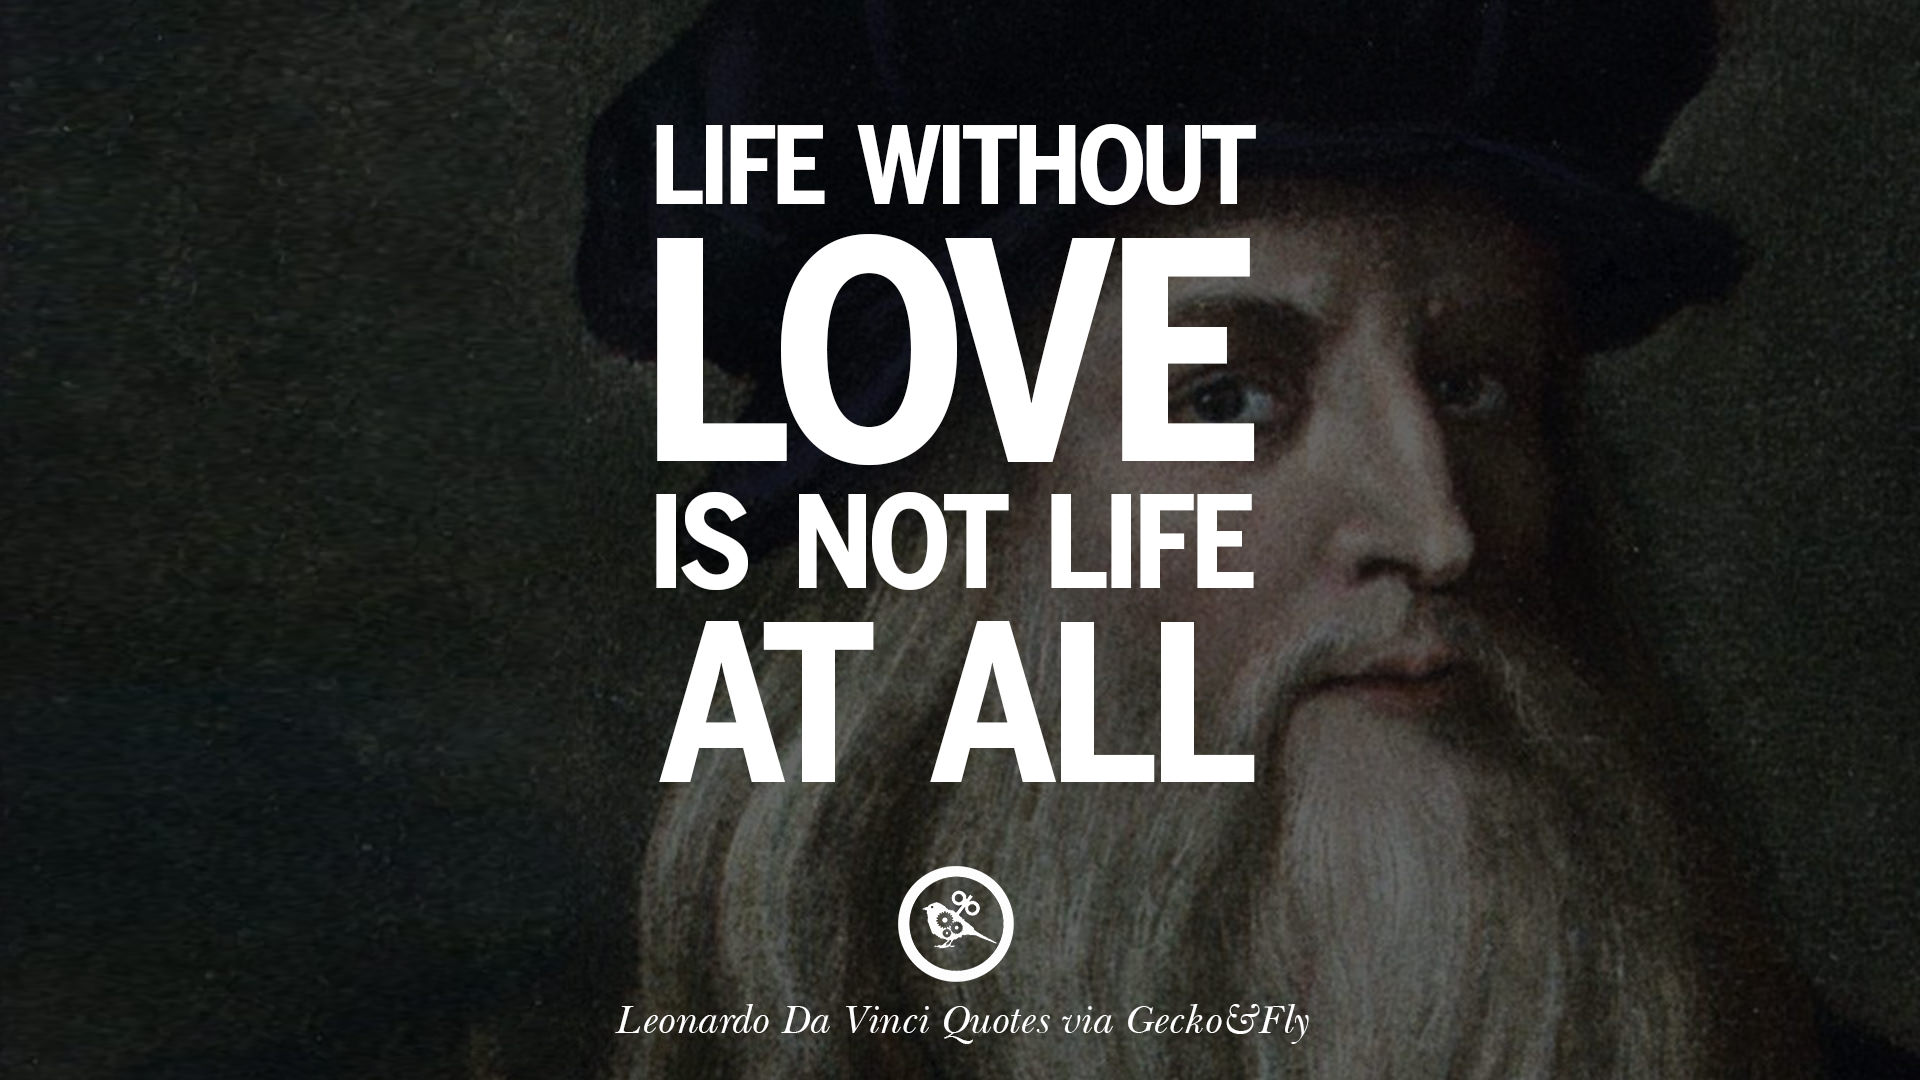 Life without love is not life at all